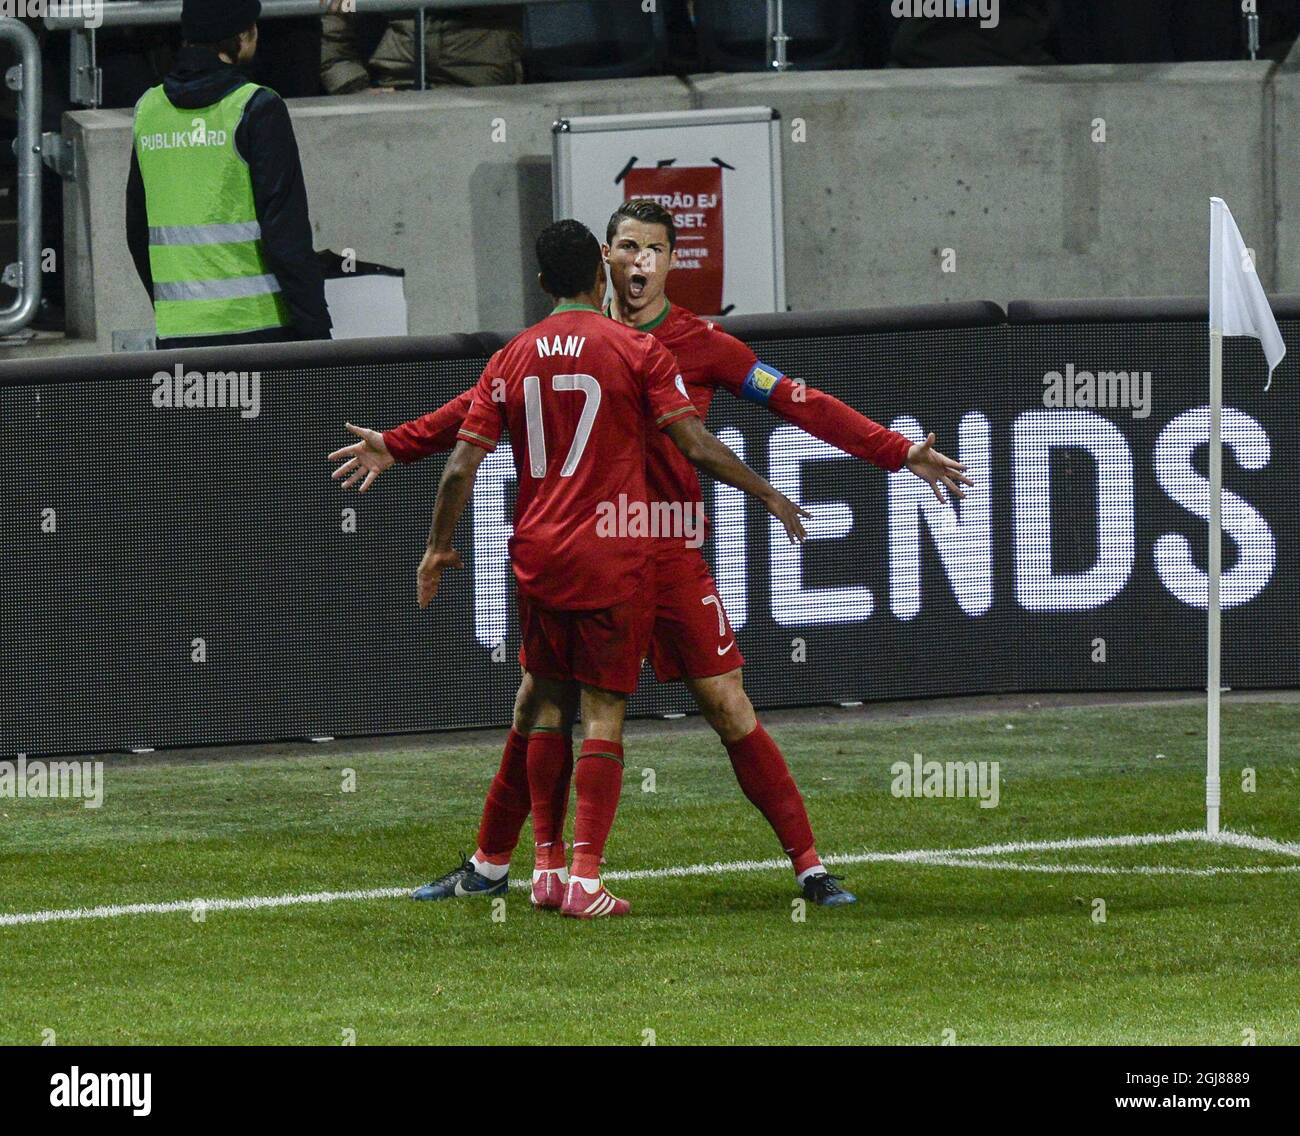 Portugal's Cristiano Ronaldo (R) celebrates scoring the 0-1 goal with team mate Nani during the FIFA World Cup 2014 qualifying playoff second leg soccer match between Sweden and Portugal at Friends Arena in Stockholm on Nov. 19, 2013. Photo: Pontus Lundahl / TT / code 10050 Stock Photo